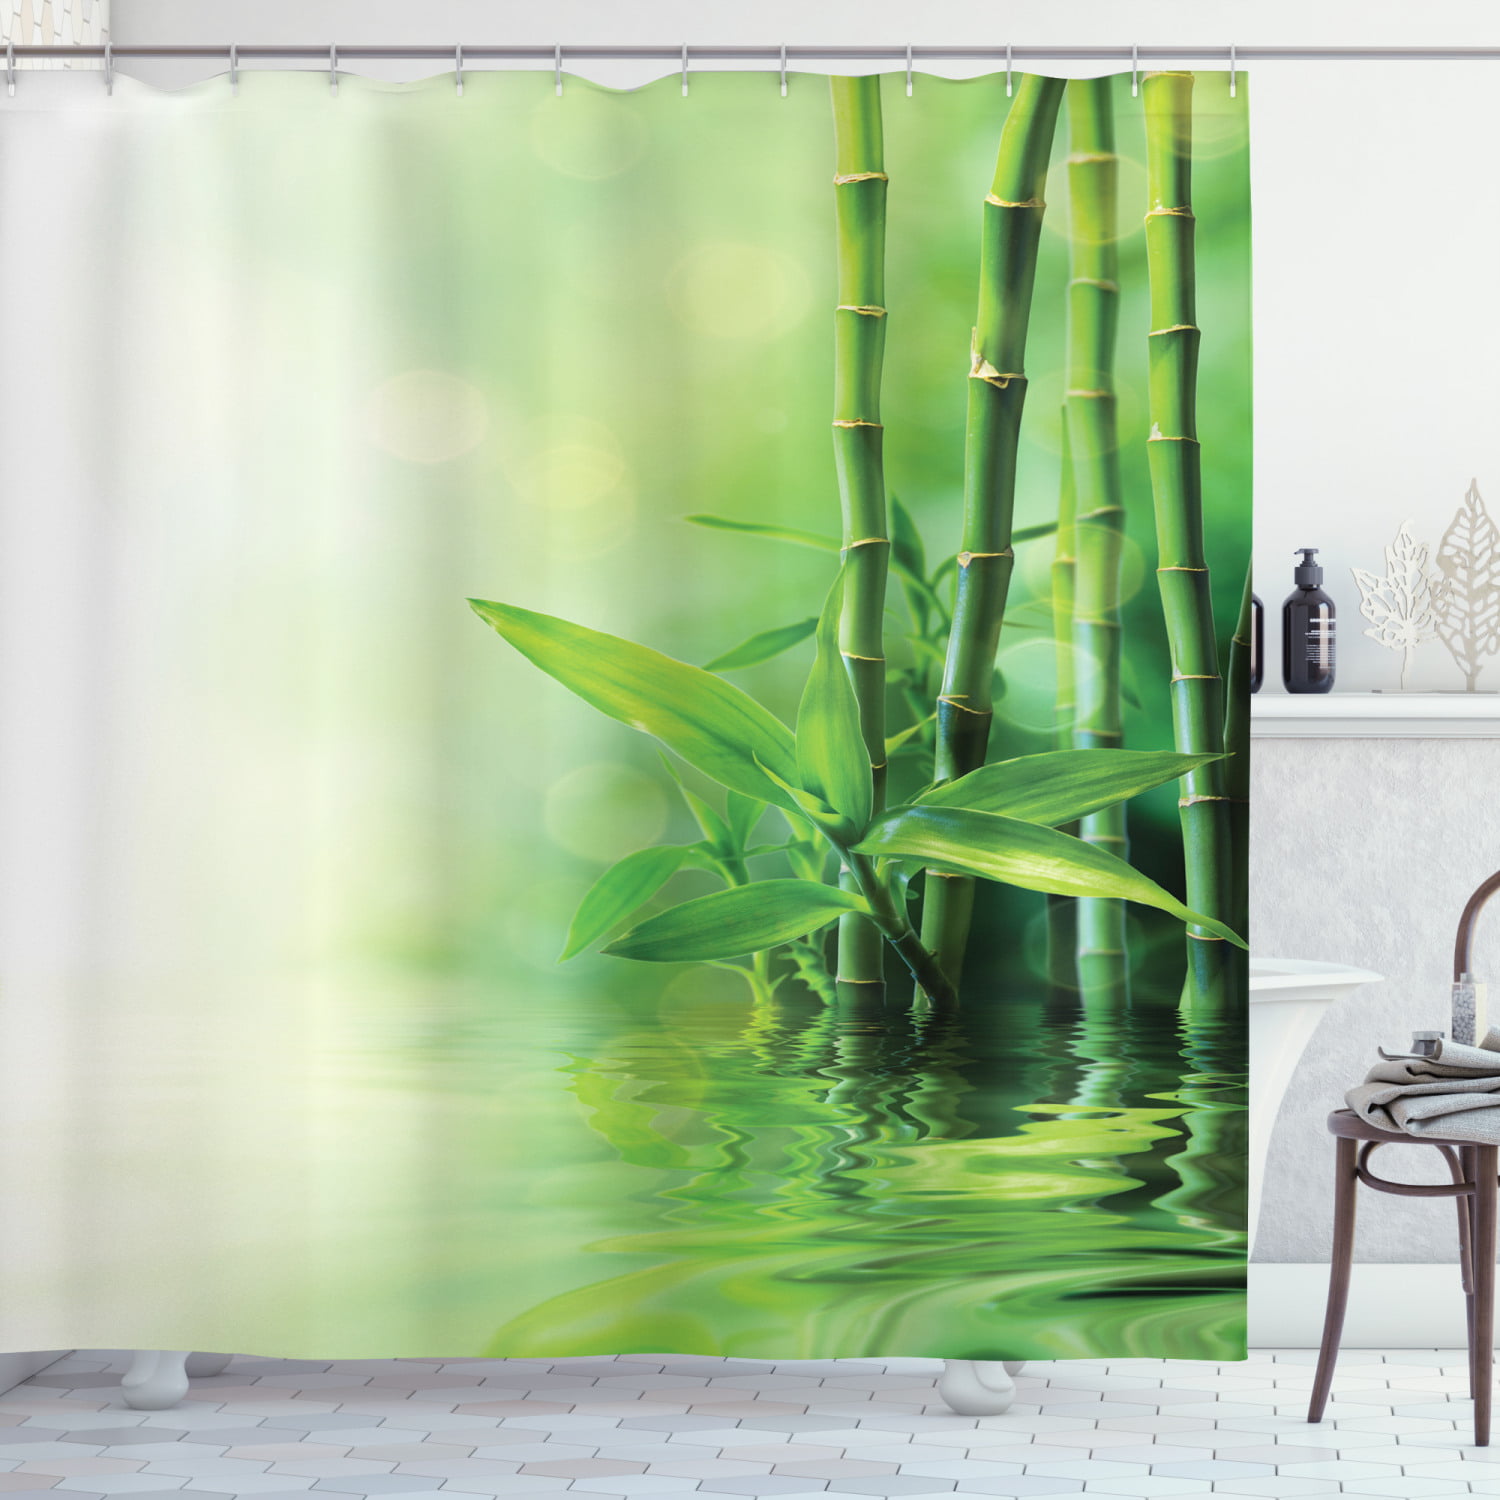 Shower Curtain Set Polyester Waterproof Fabric Sprout Bamboo Forest Background 